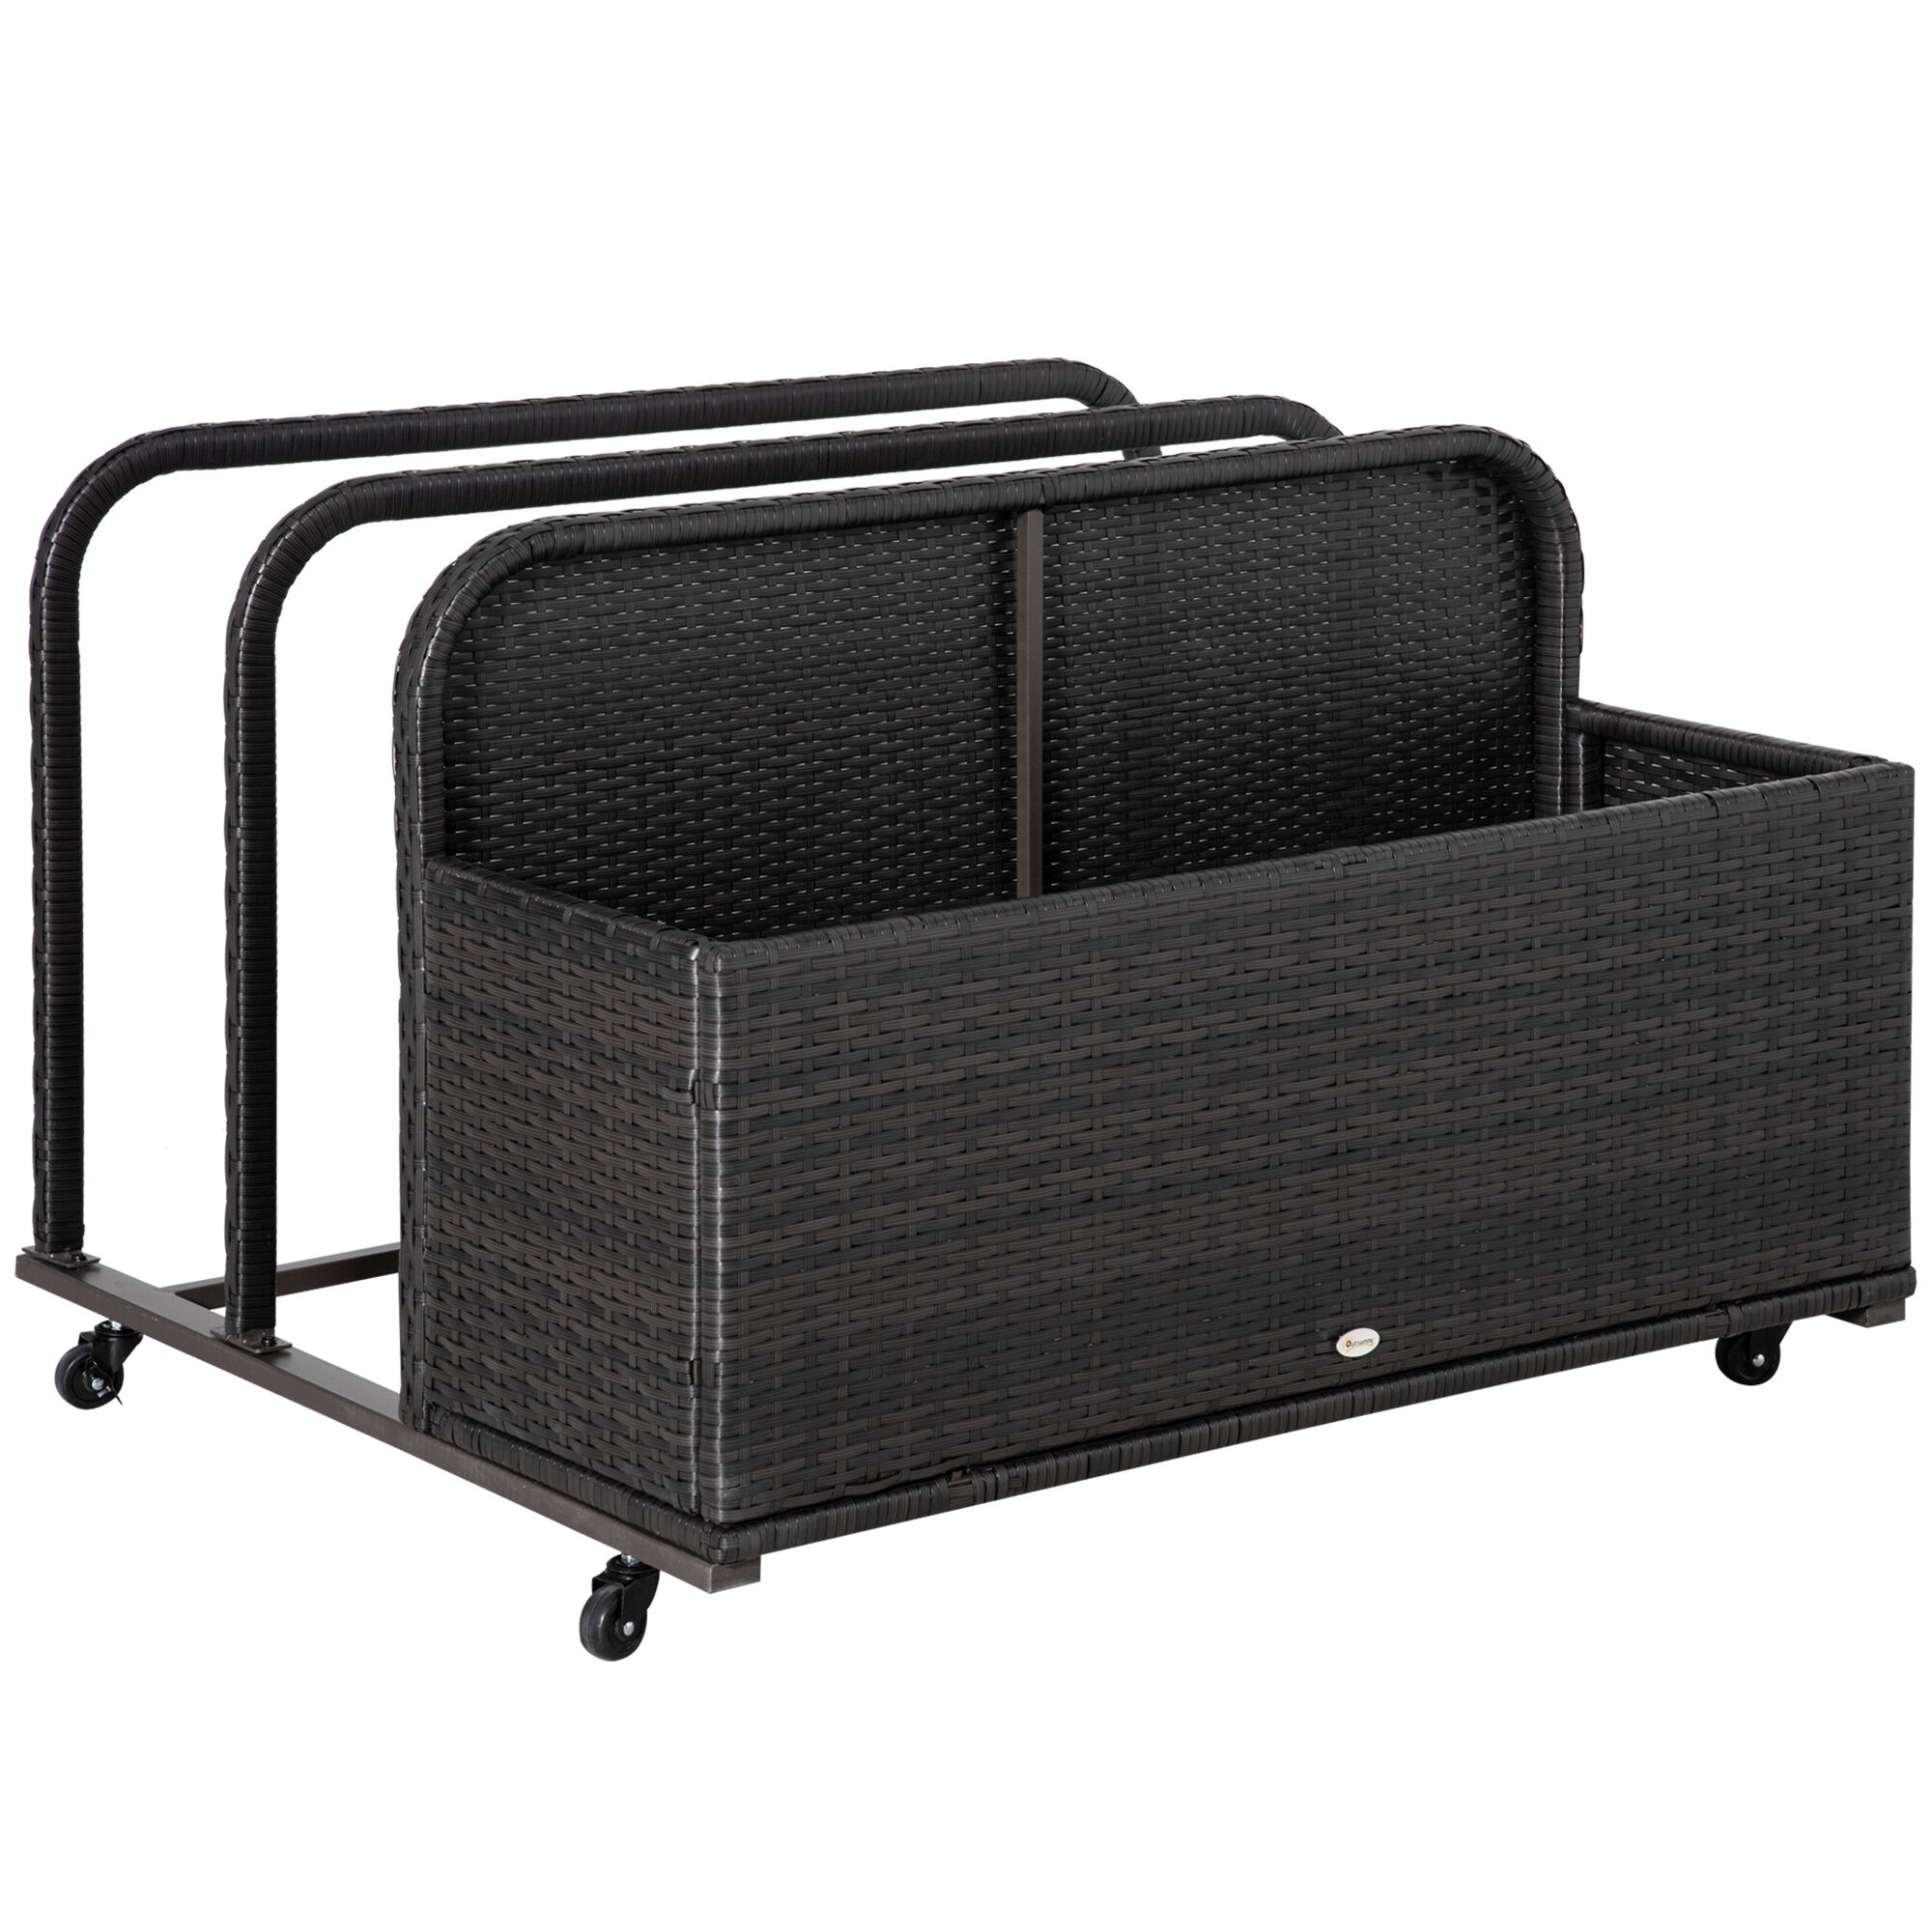 Outsunny Rattan Poolside Float Storage Cart, Outdoor Accessory Organizer with Wheels, Brown   Aosom.com